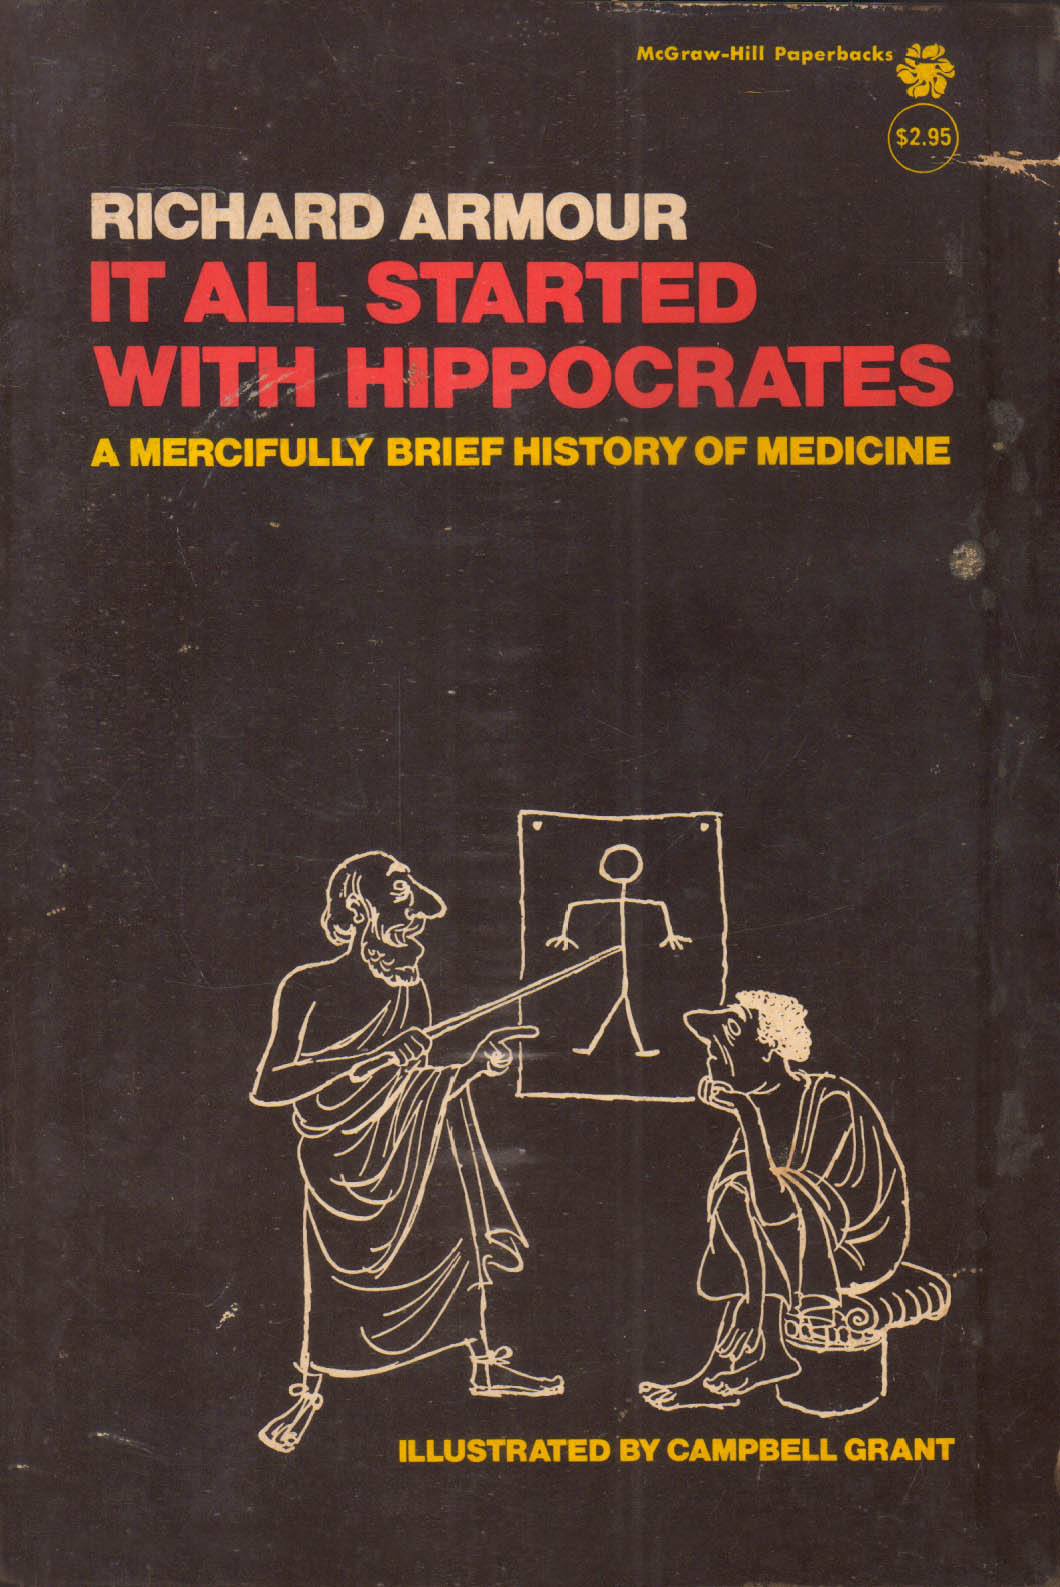 It All Started with Hippocrates